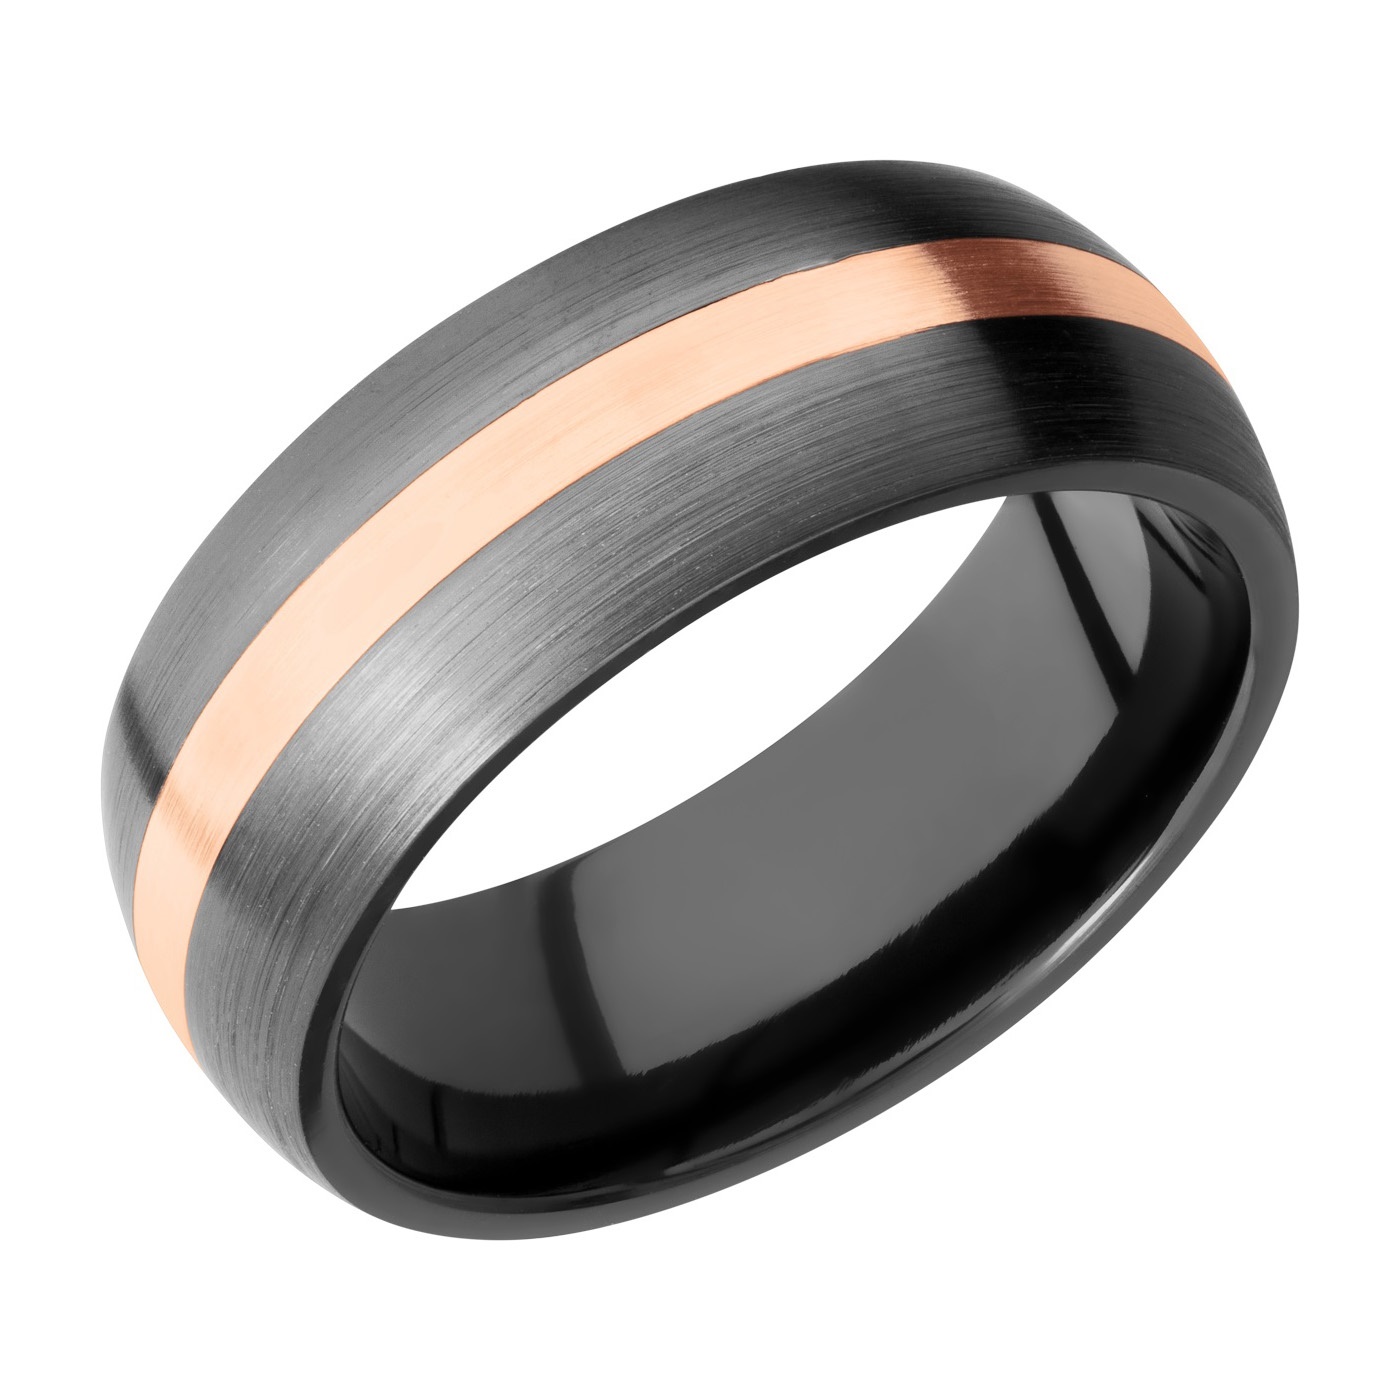 Zirconium and Rose Gold Wedding Band by Lashbrook Designs - Rings